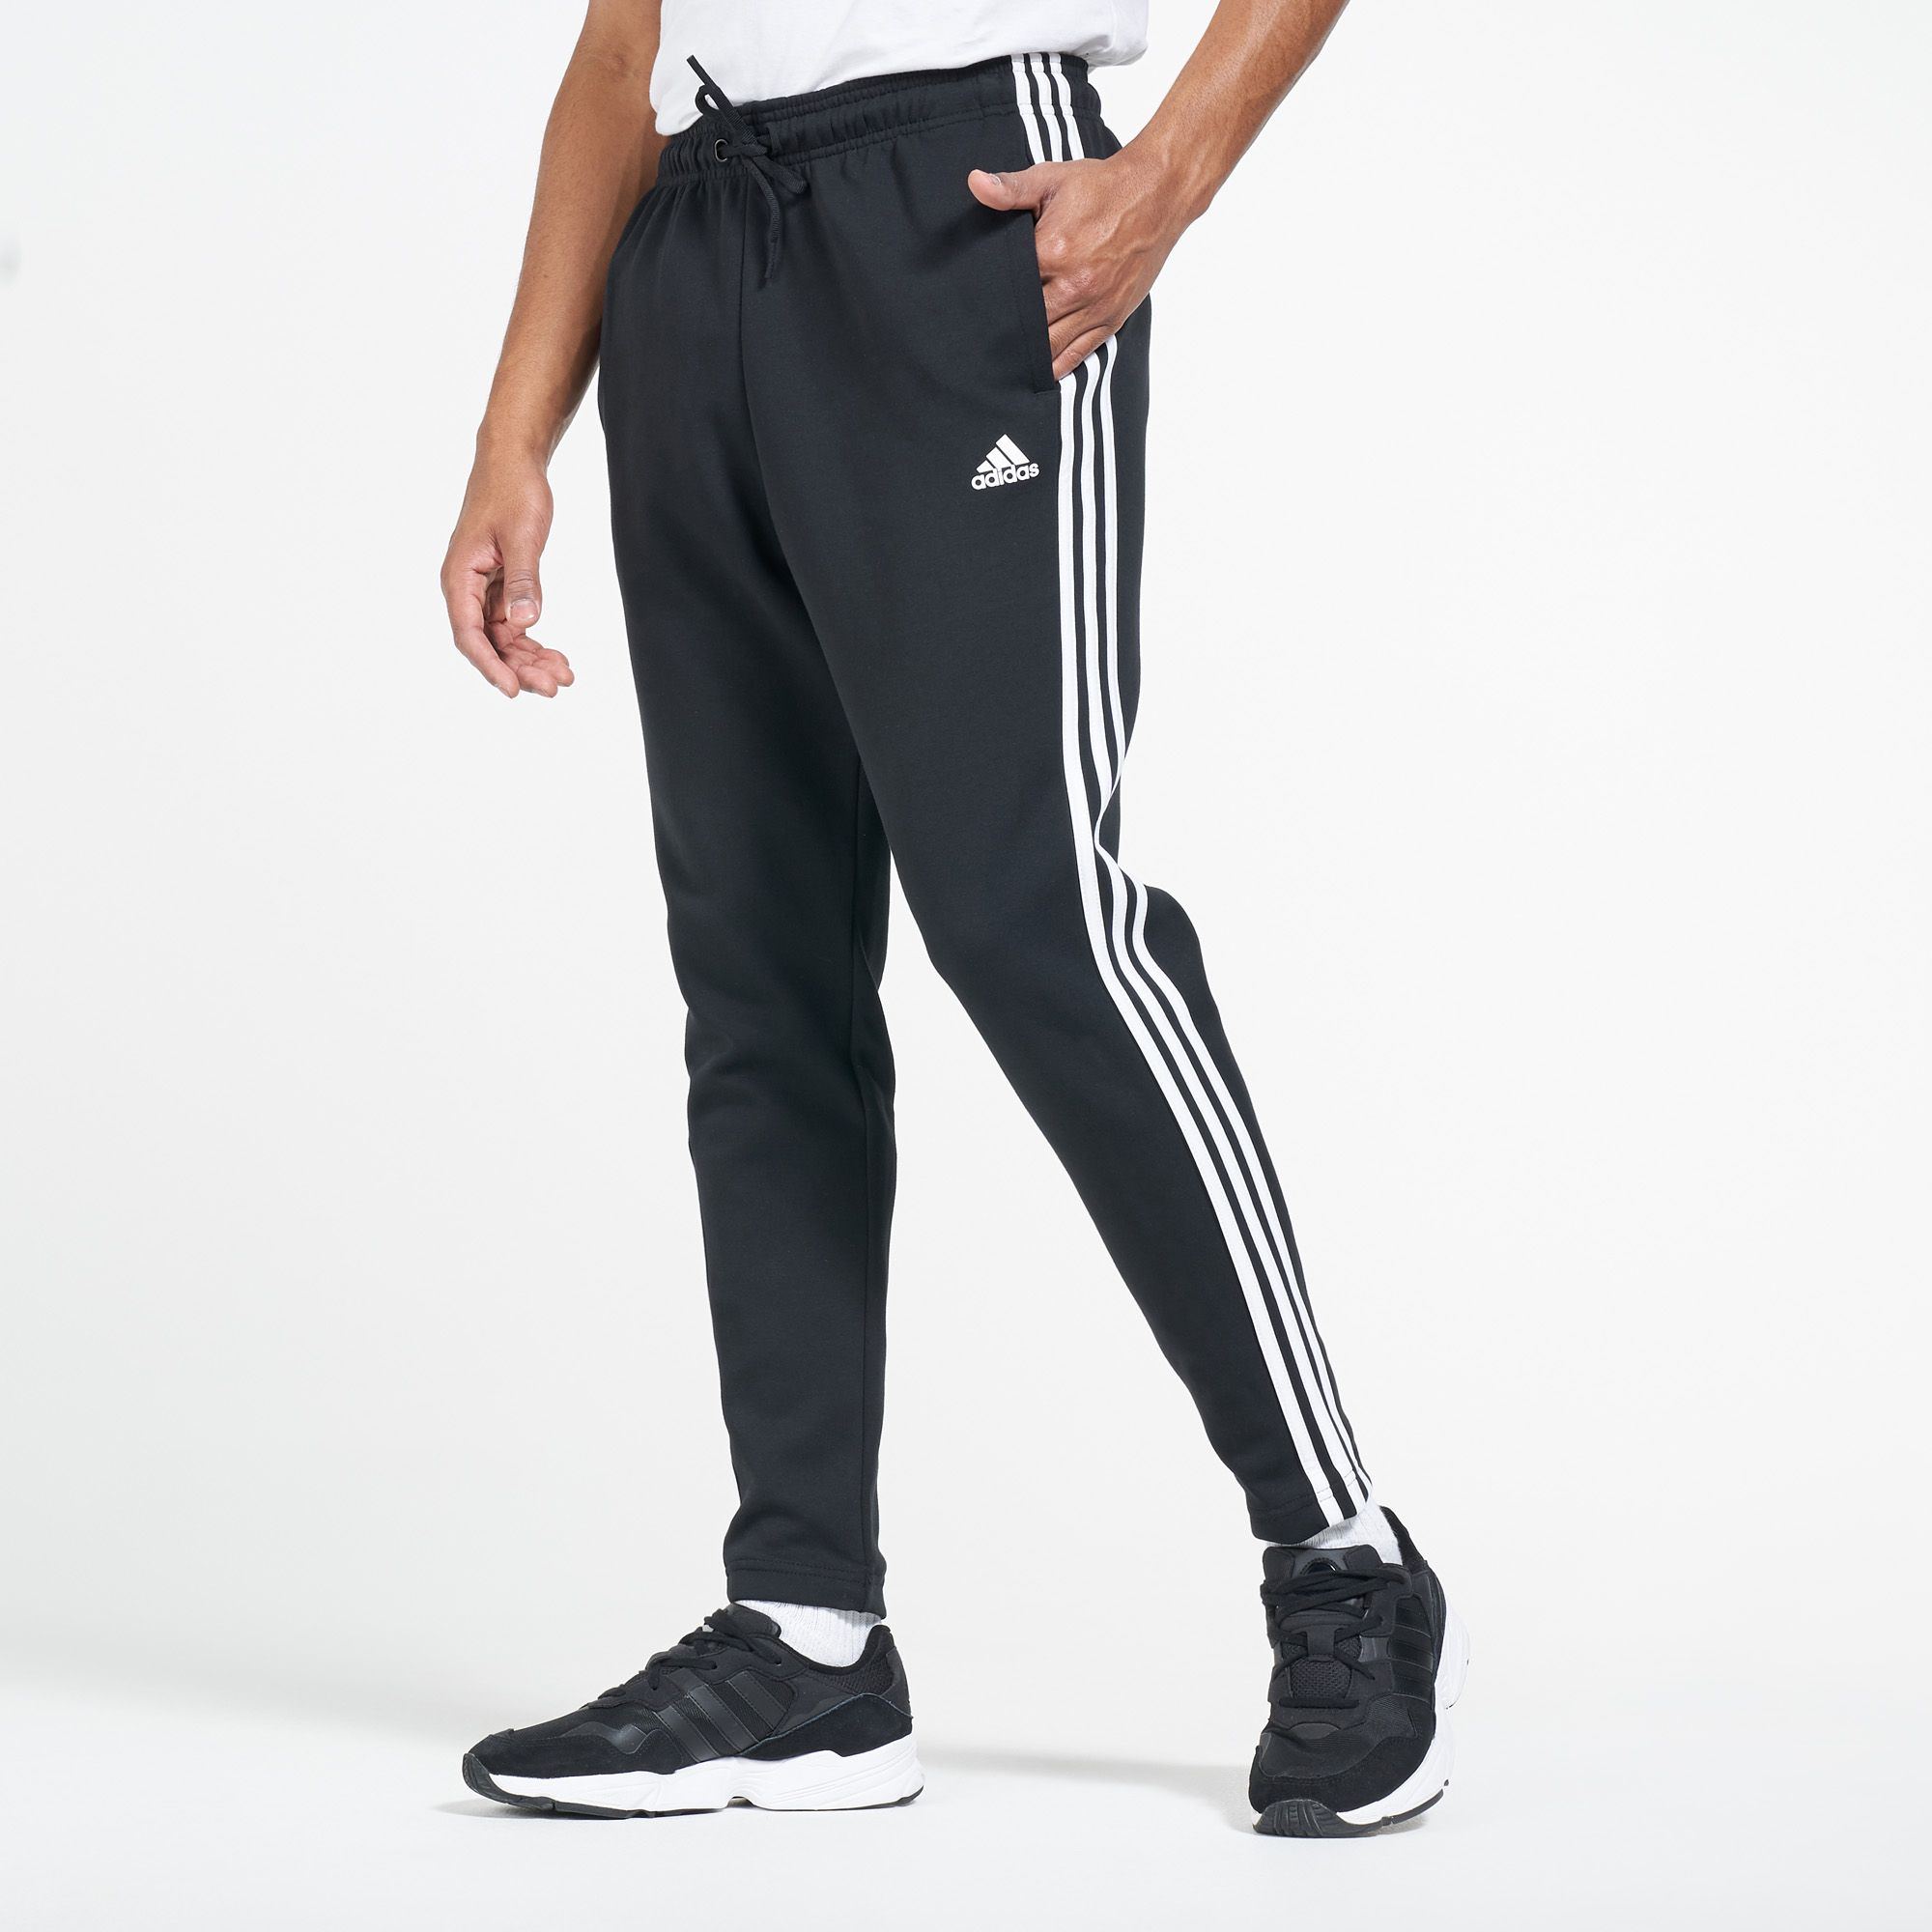 Buy Adidas Black Polyester Strips Track Pant Online - Get 80% Off